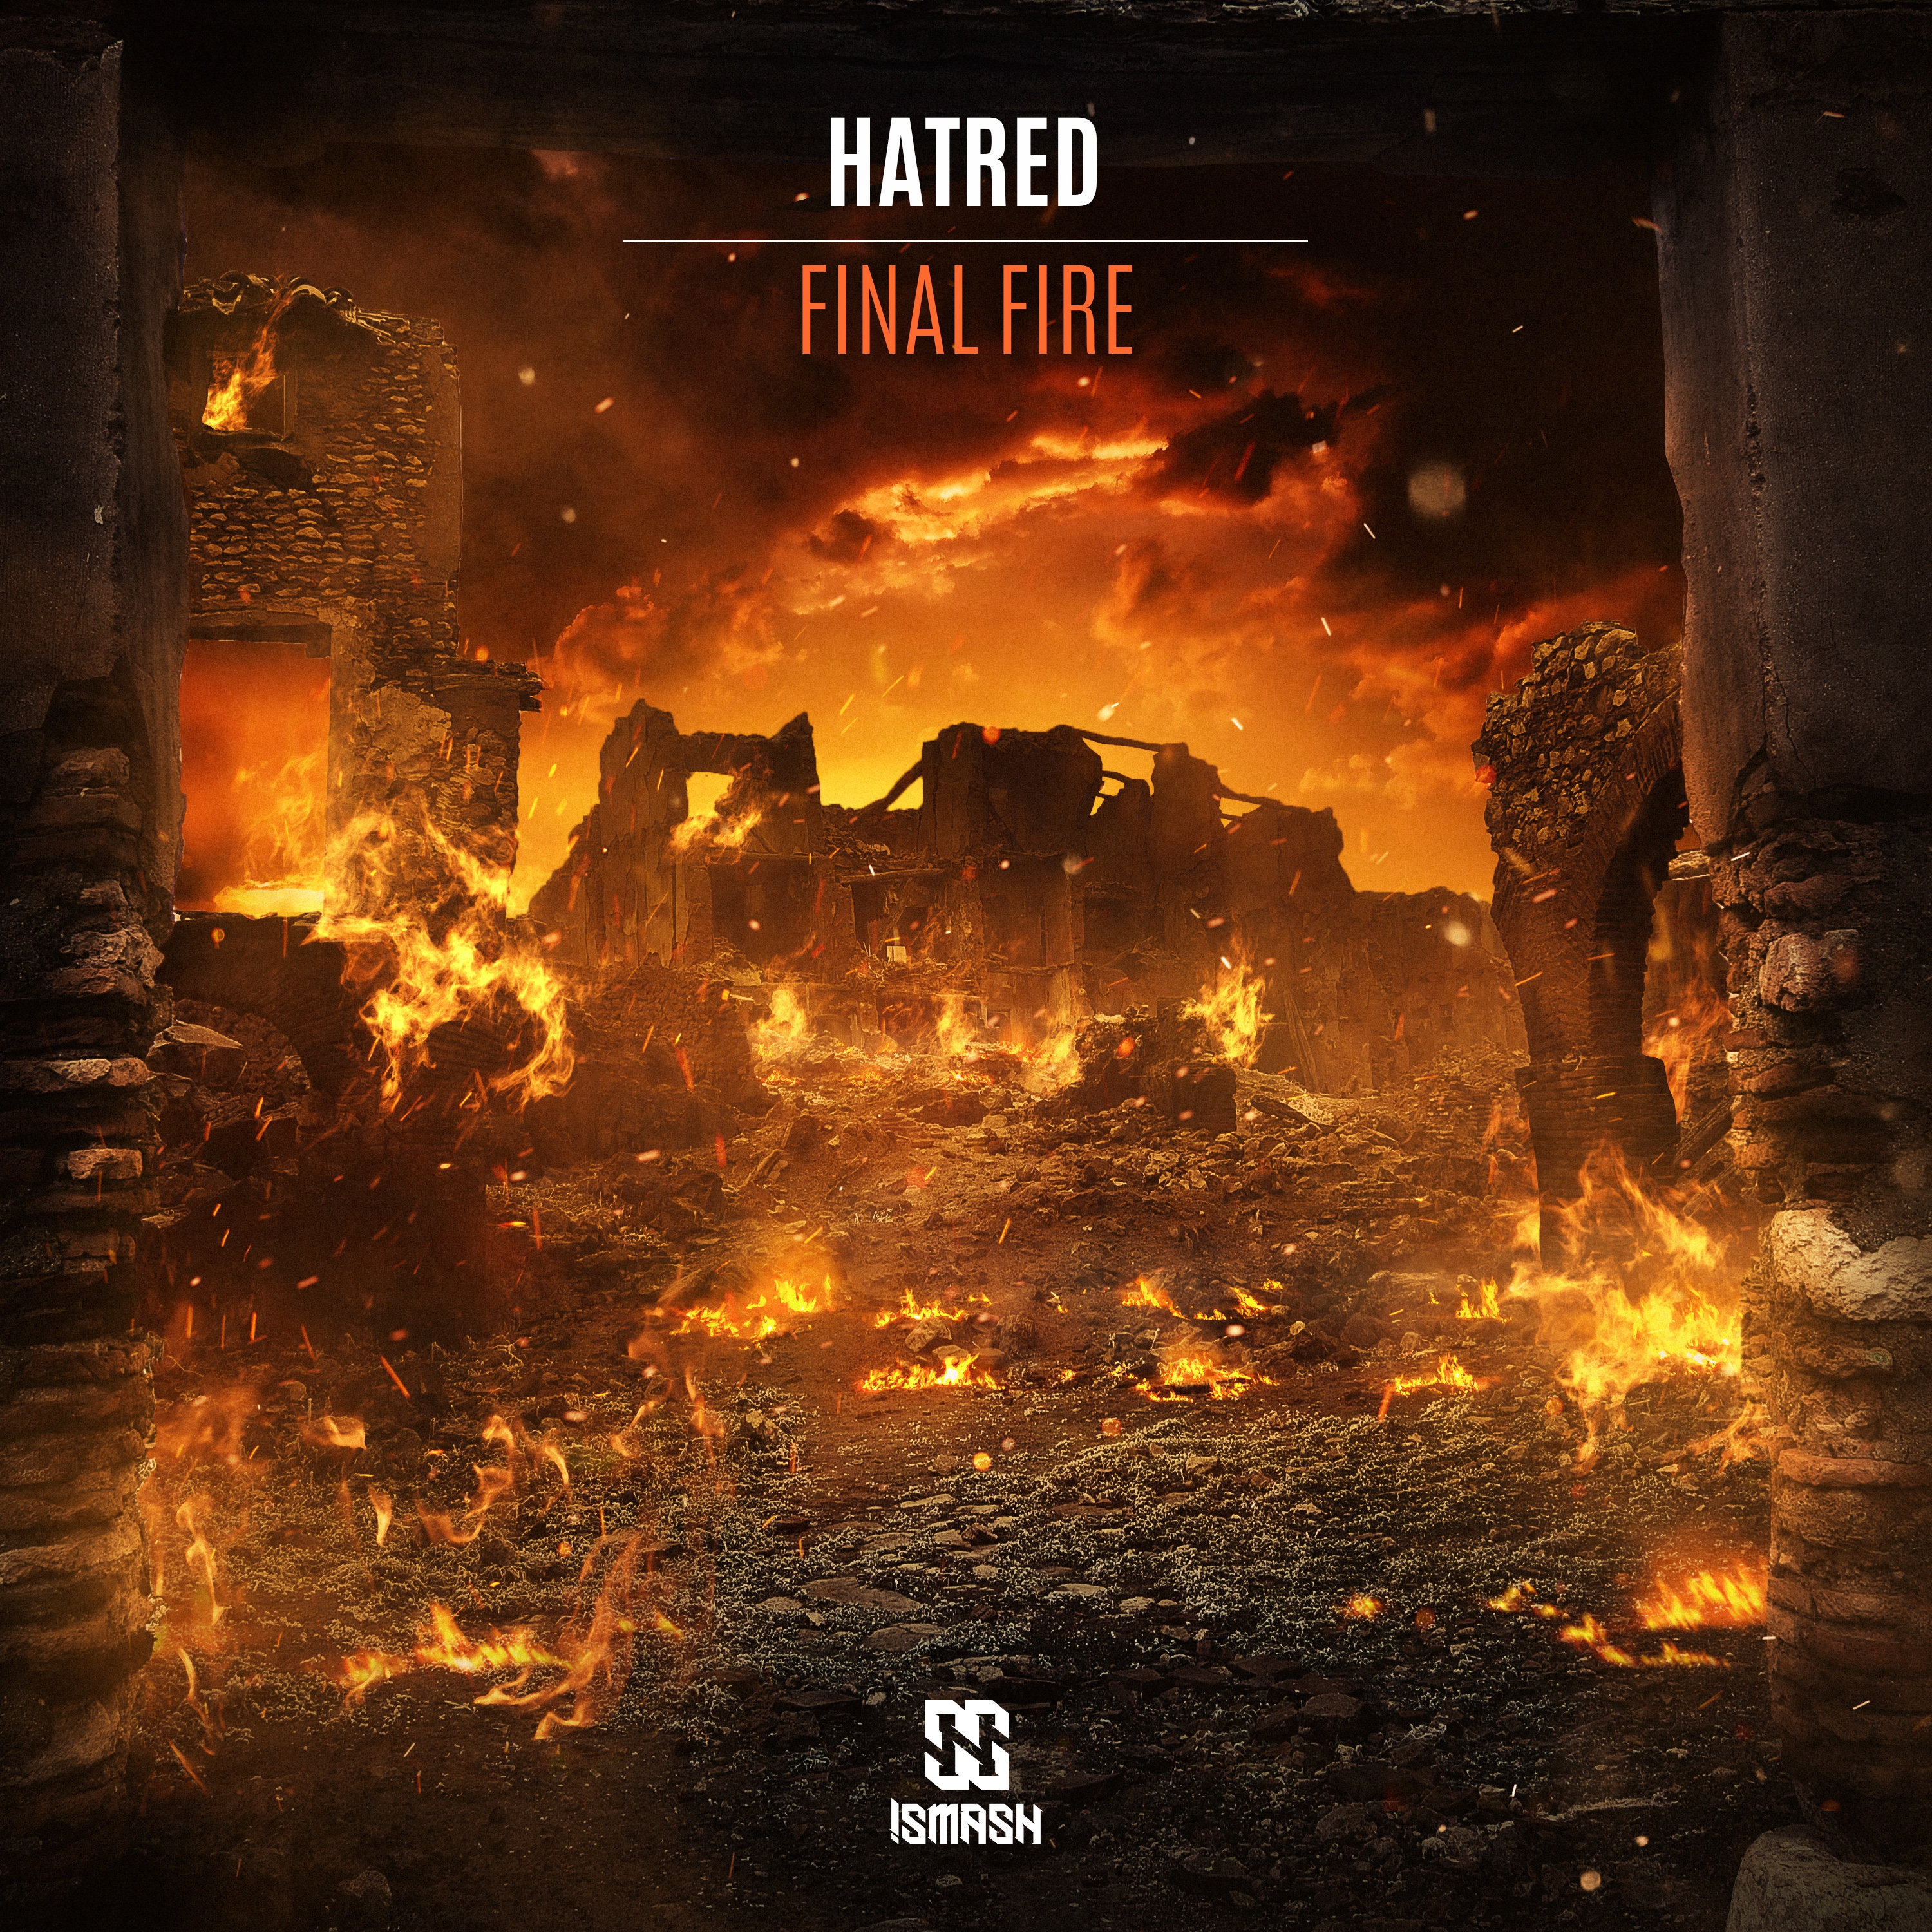 Hatred - Final Fire (Edit) - MP3 and WAV downloads at Hardtunes